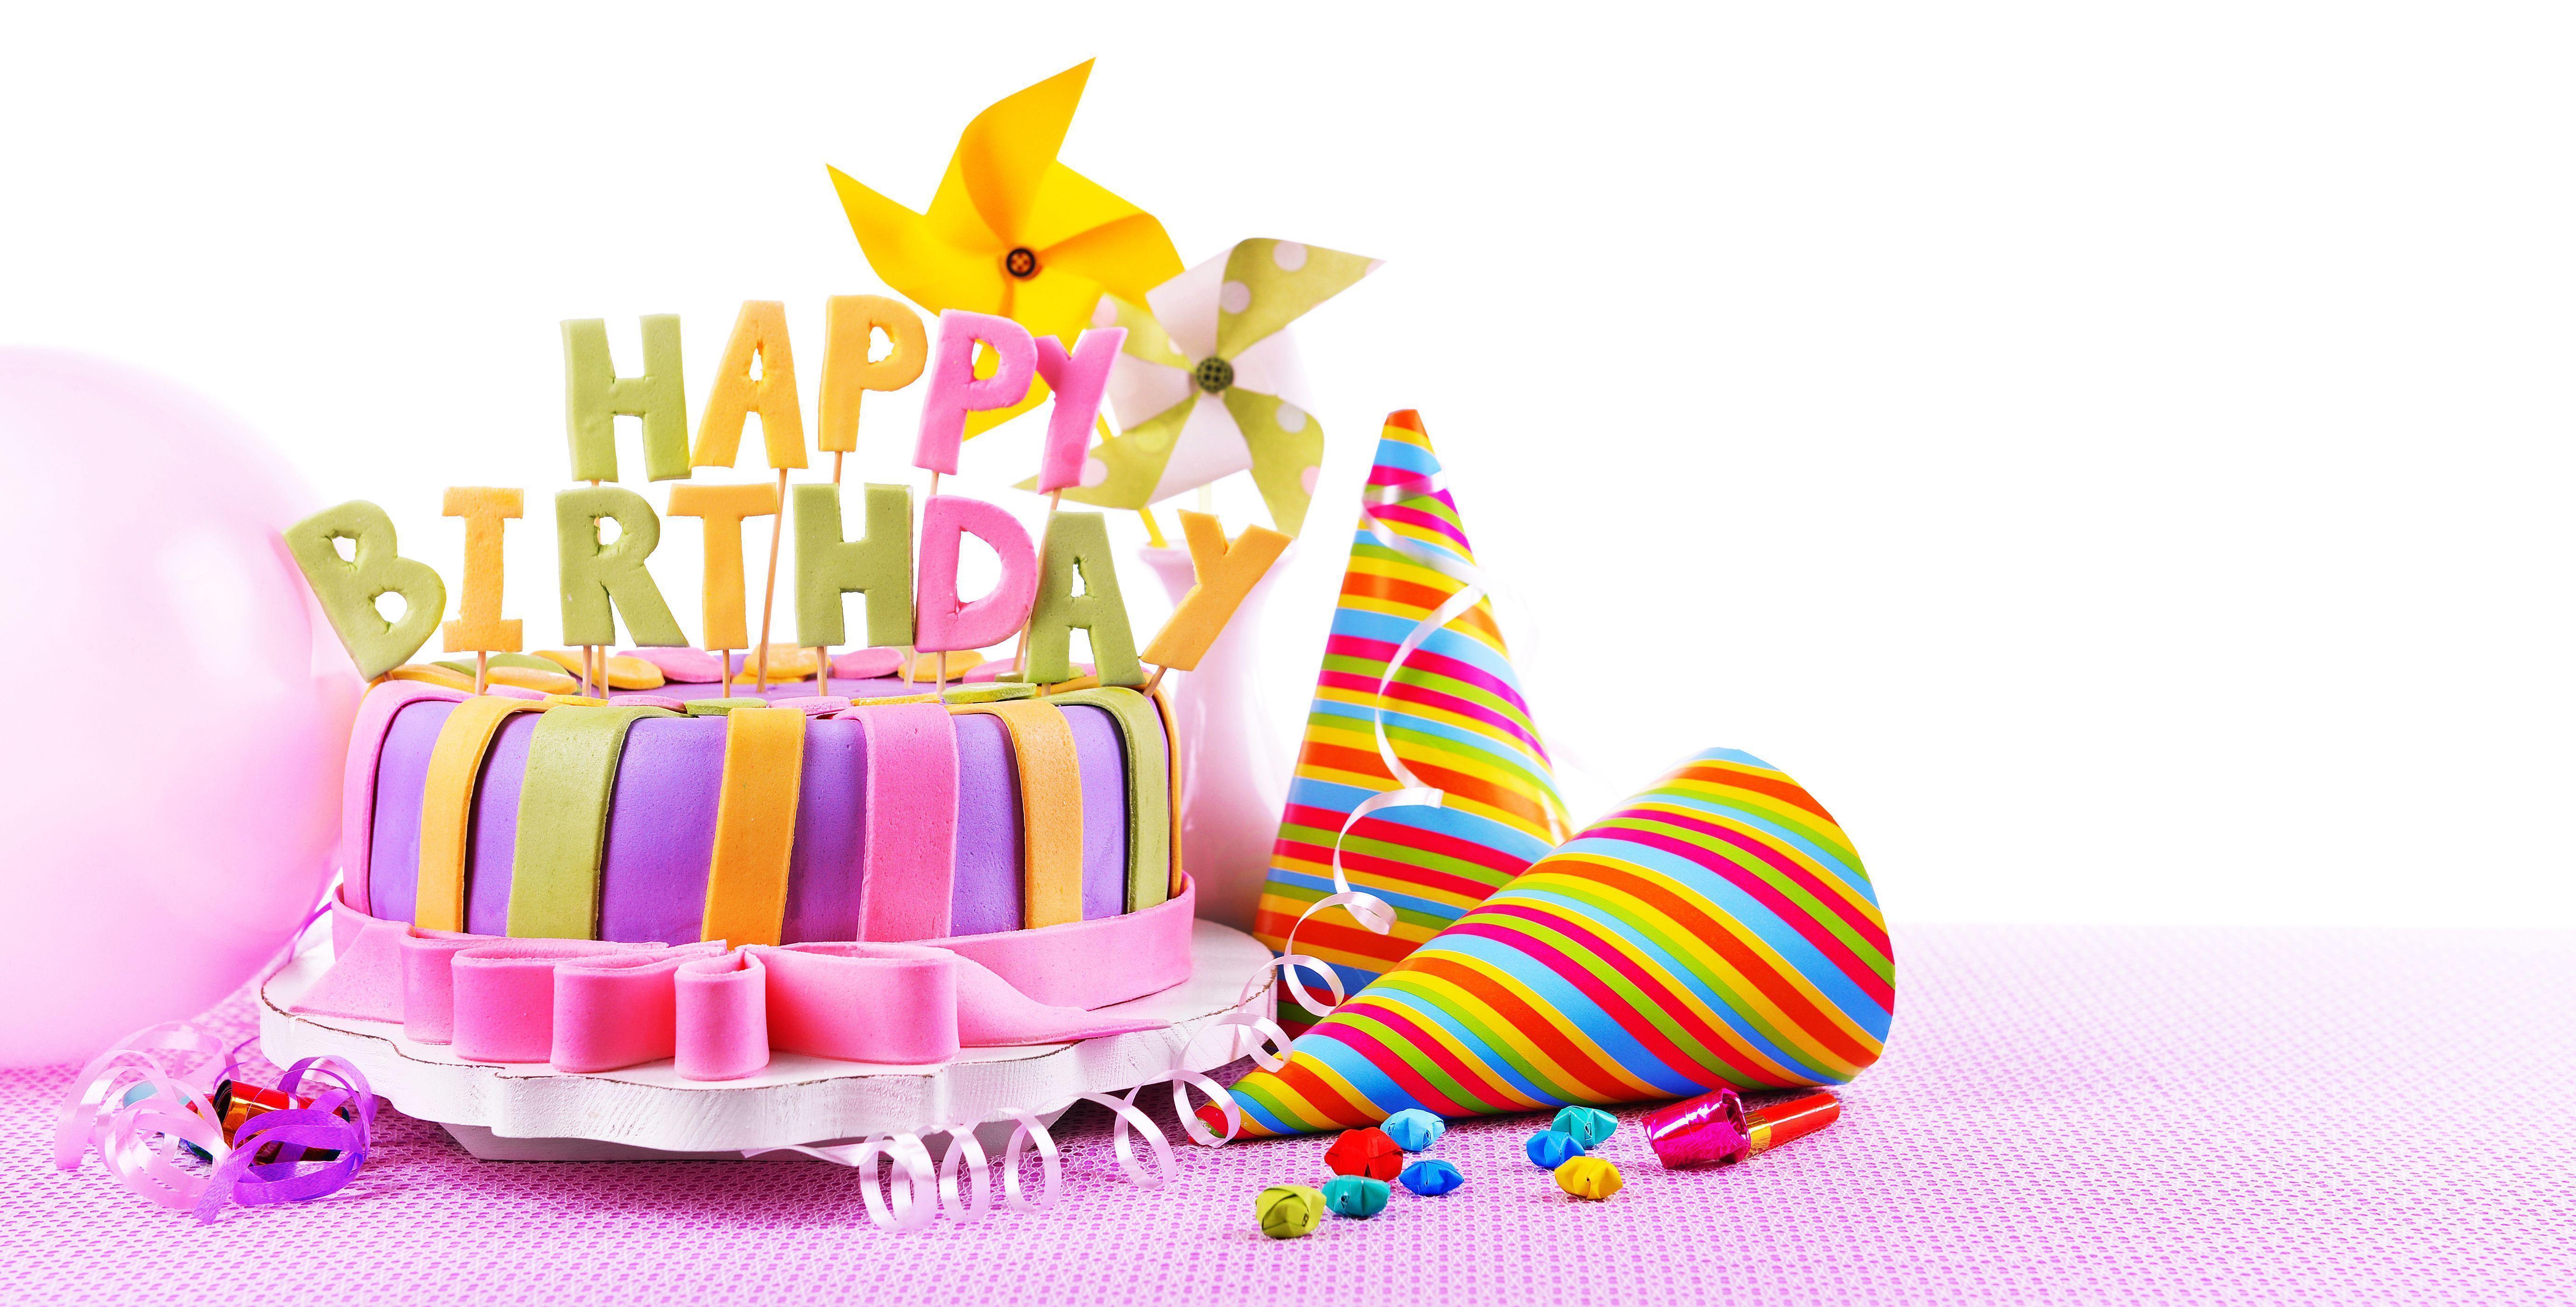 10000 Best Birthday Cake Images  100 Royalty Free Photo Downloads   Pexels Stock Photos